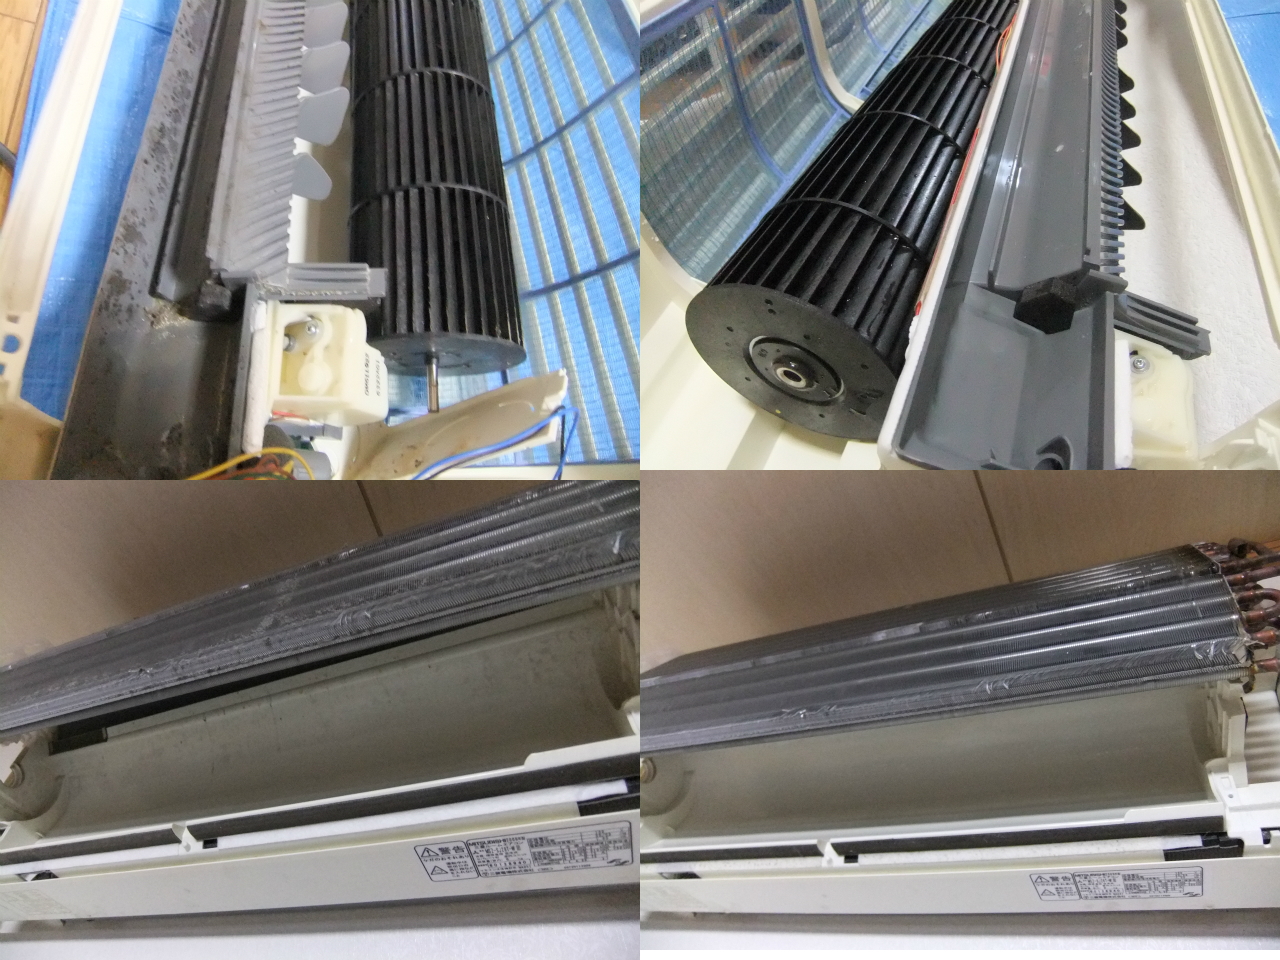 http://ajras.net/images/120706-aircon2.jpg